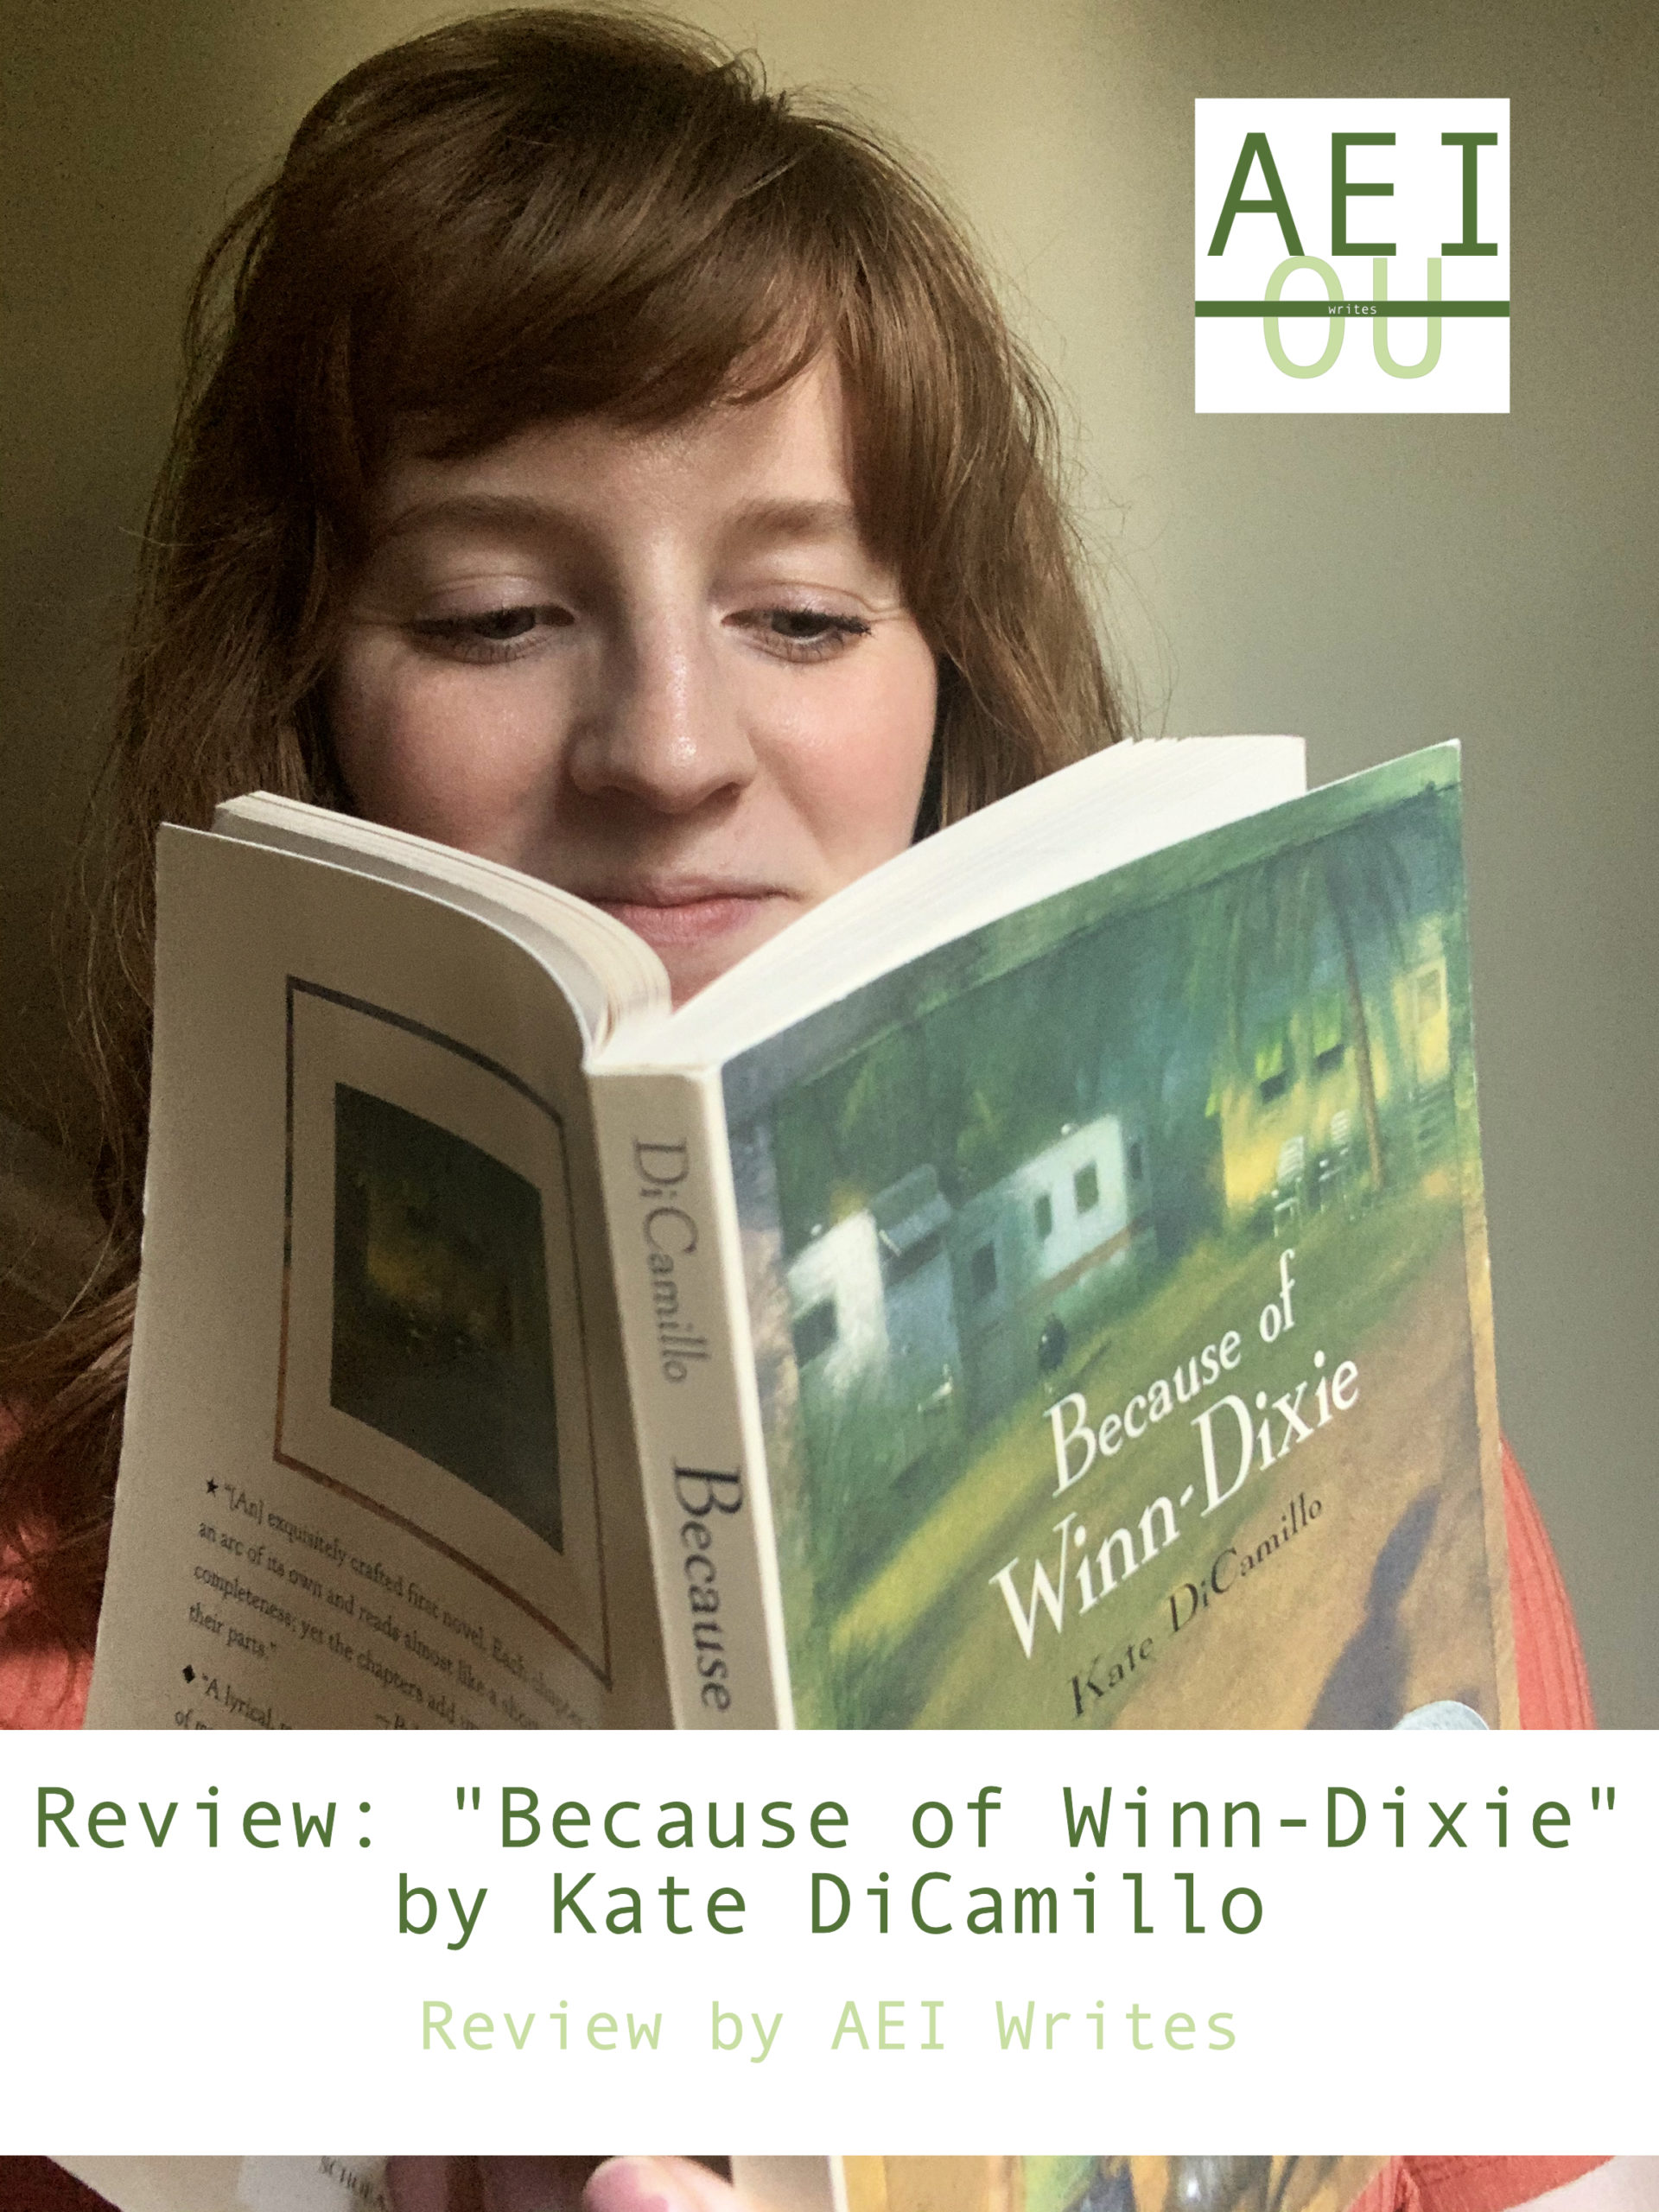 Review: “Because of Winn-Dixie” by Kate DiCamillo